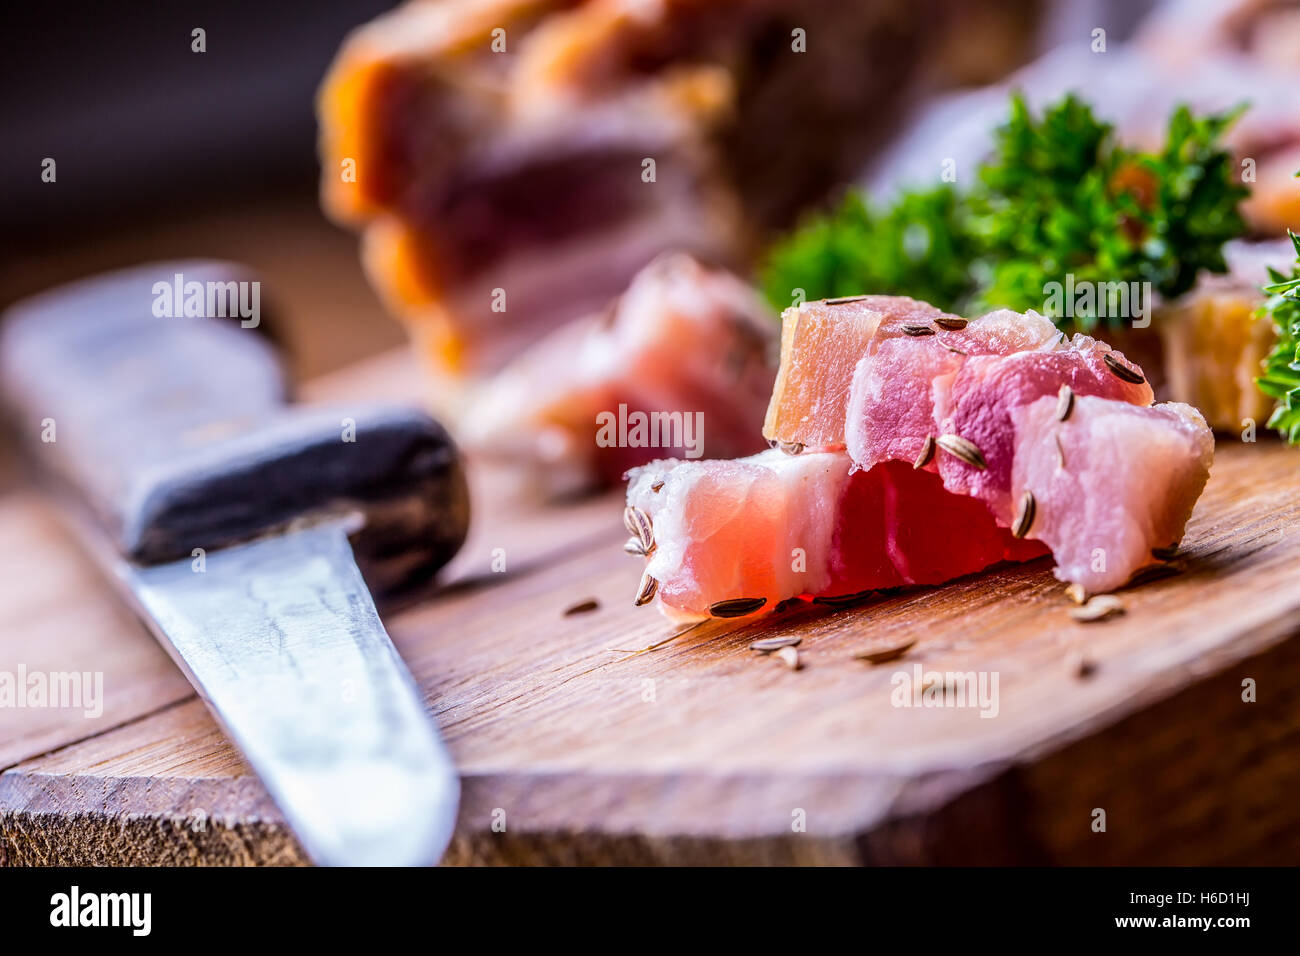 Raw smoked bacon slices on wooden board with cumin and herbs. Stock Photo